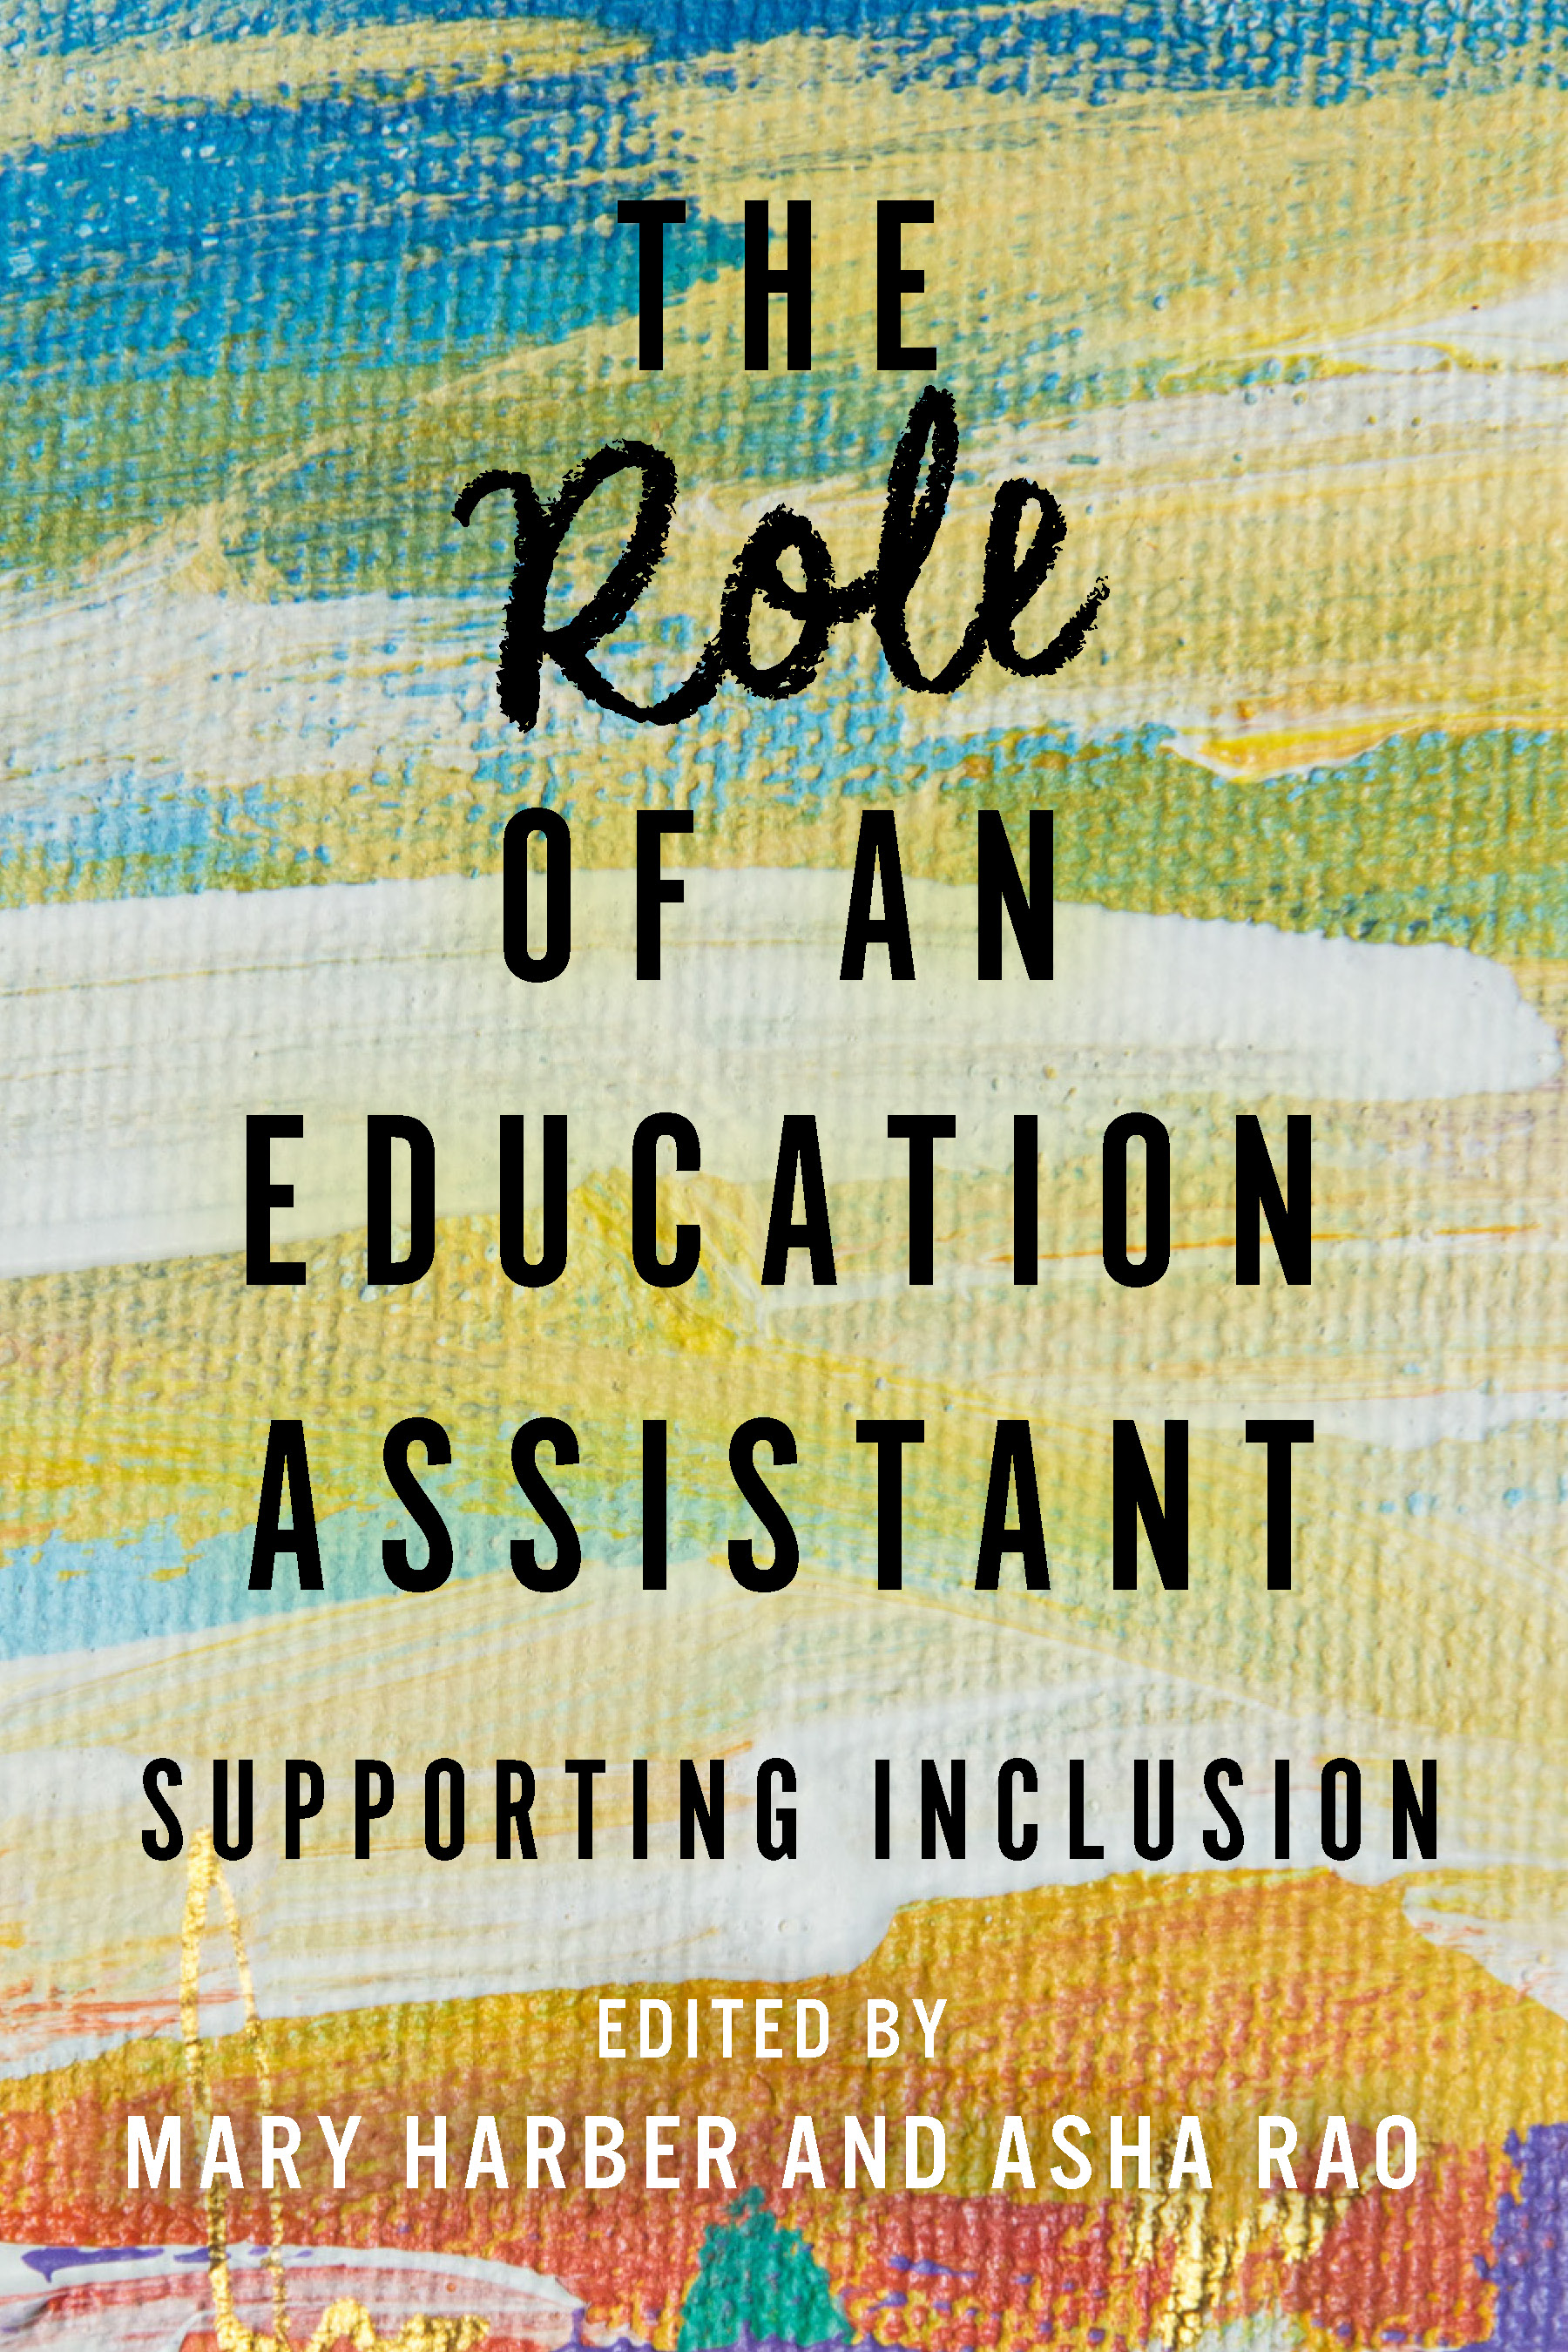 responsibilities of education assistant